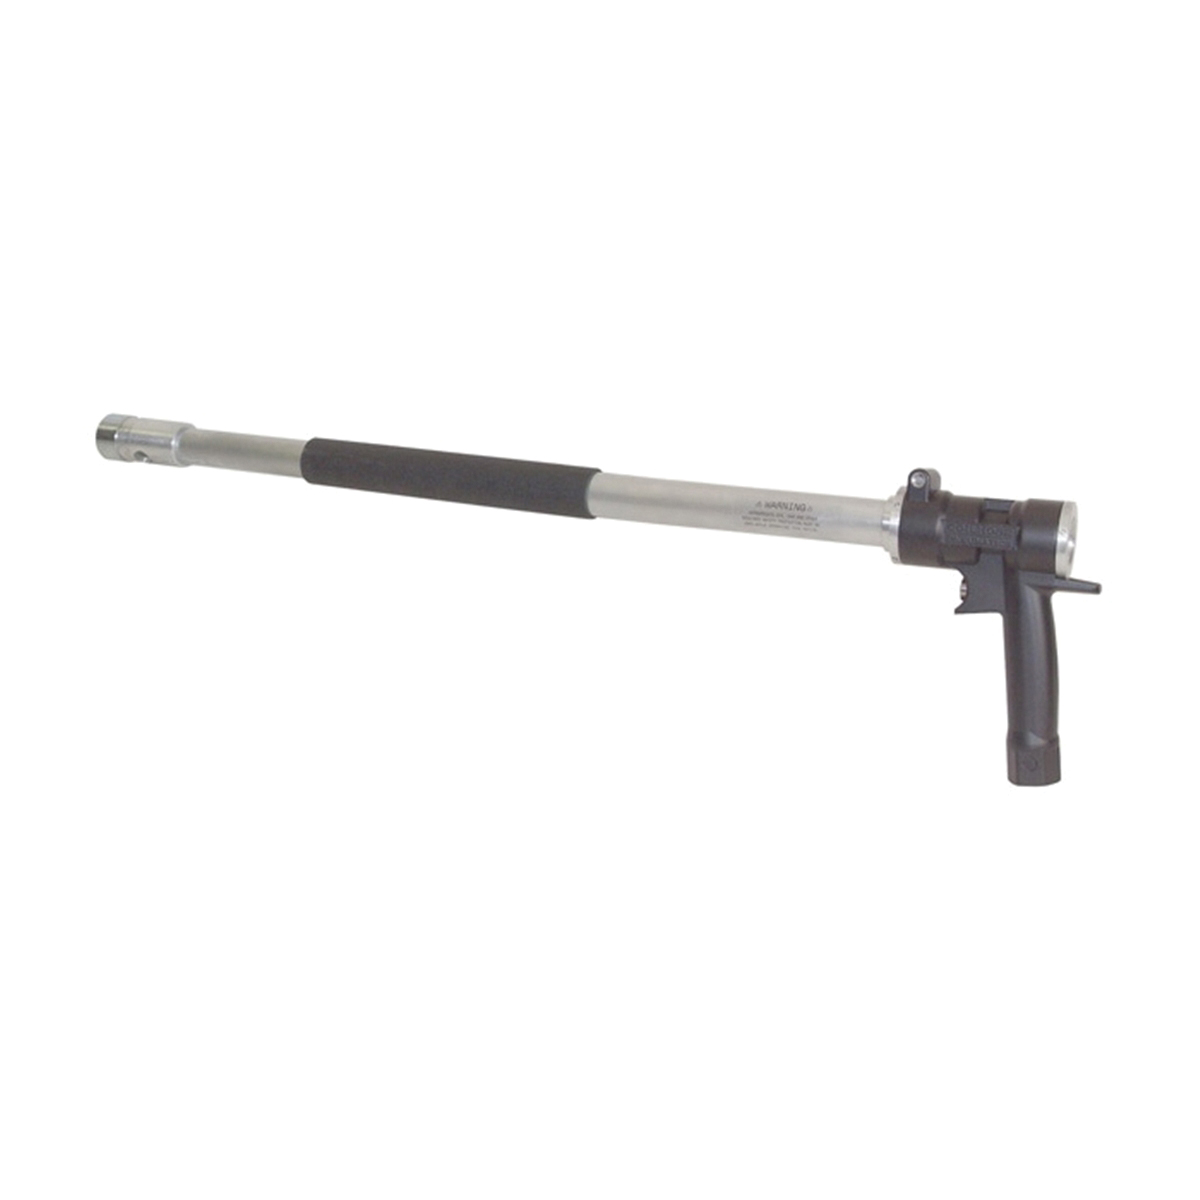 Blow Gun With Single Safety Nozzle, 3/4 in Inlet Connection, 135 cfm Air Consumption, Concentrated Stream Airflow